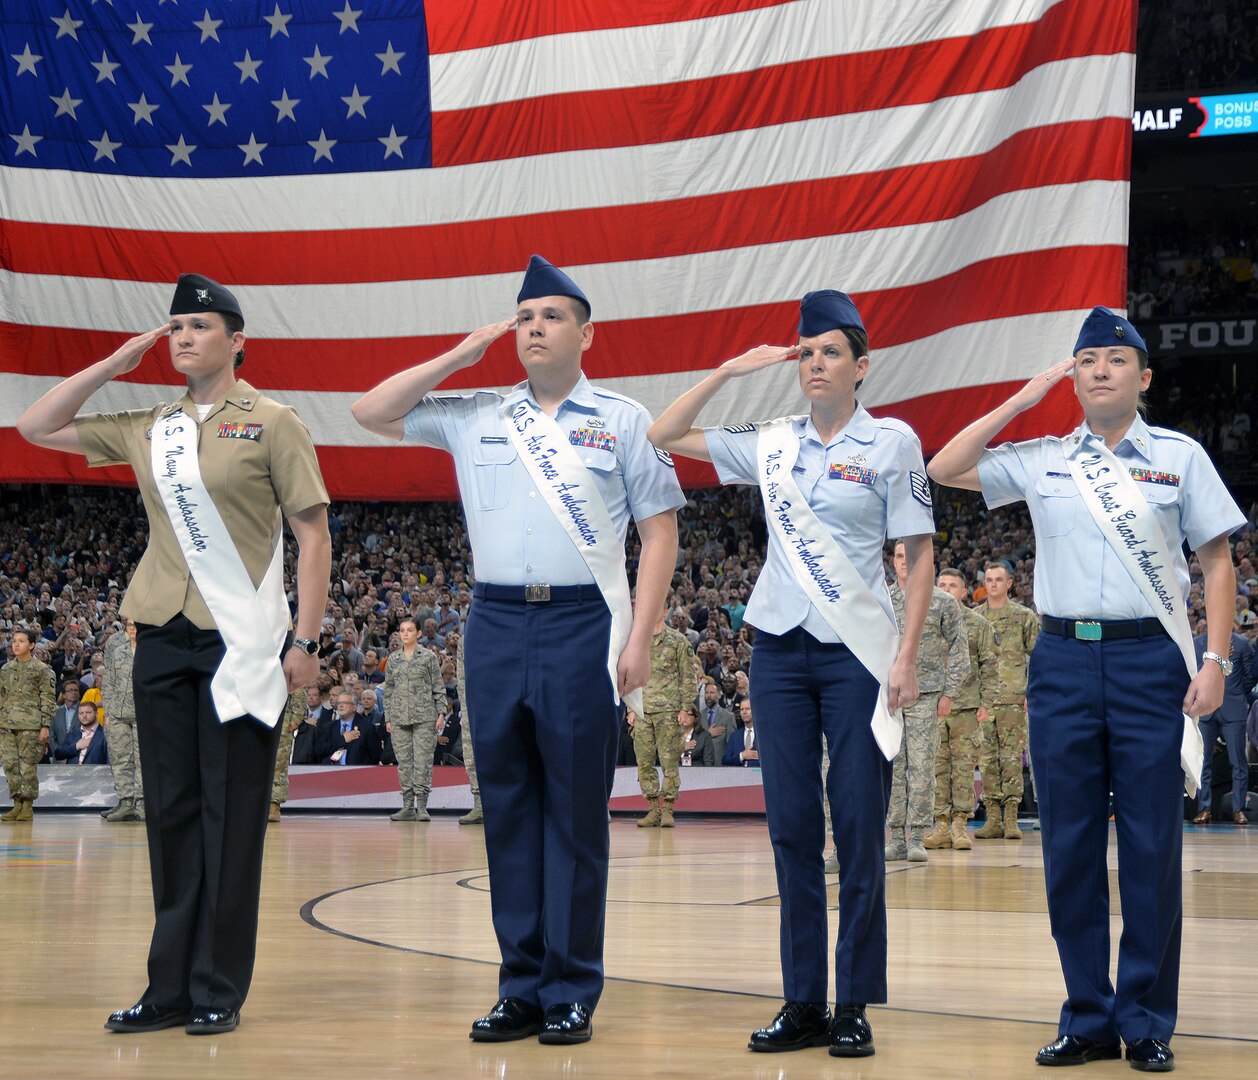 Members of the 2018 Joint Base San Antonio Ambassadors salute during the National Anthem as part of the pregame ceremonies at the NCAA Division I men's basketball championship game at the Alamodome Monday, April 2, 2018. From left are Petty Officer 1st Class Shannon Chatterton, Tech. Sgt. Christofer Mercado, Tech. Sgt. Melissa Bennett and Petty Officer 1st Class Victoria Toth.